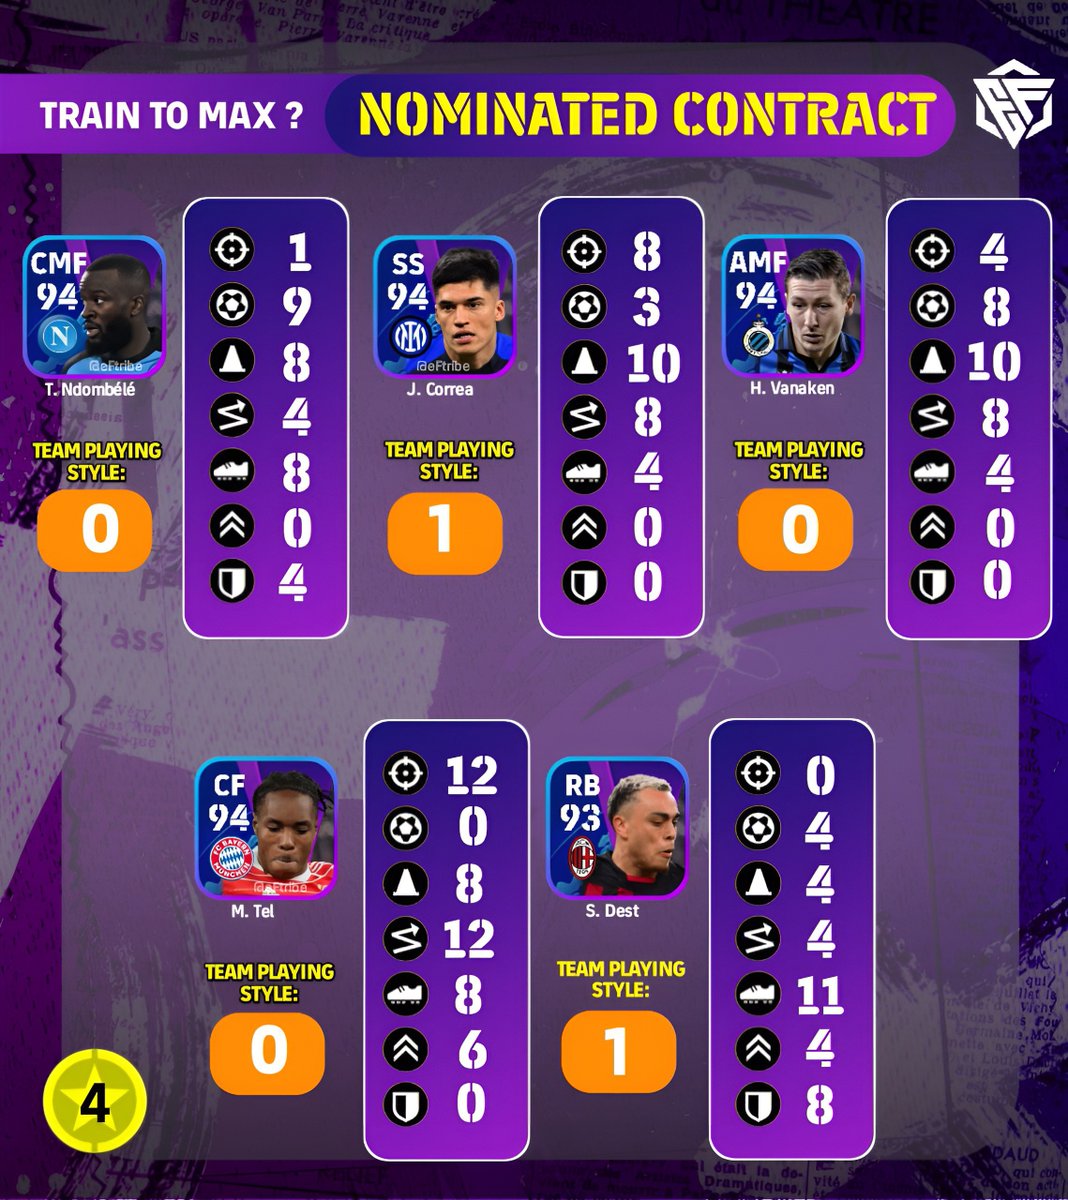 [TRANING GUIDE] 4 '⭐' Player From European Club Championship Selection Pack Available In #eFootball2023 !

Which Card Is More Worthy ?
.
 
Whom You Packed ?
.
.
Will They Worthy ?
.
.
Your Opinion About This Pack 
#eFootball2022 #eFootballHUB #EuropeanChampionship #UCLTOTW